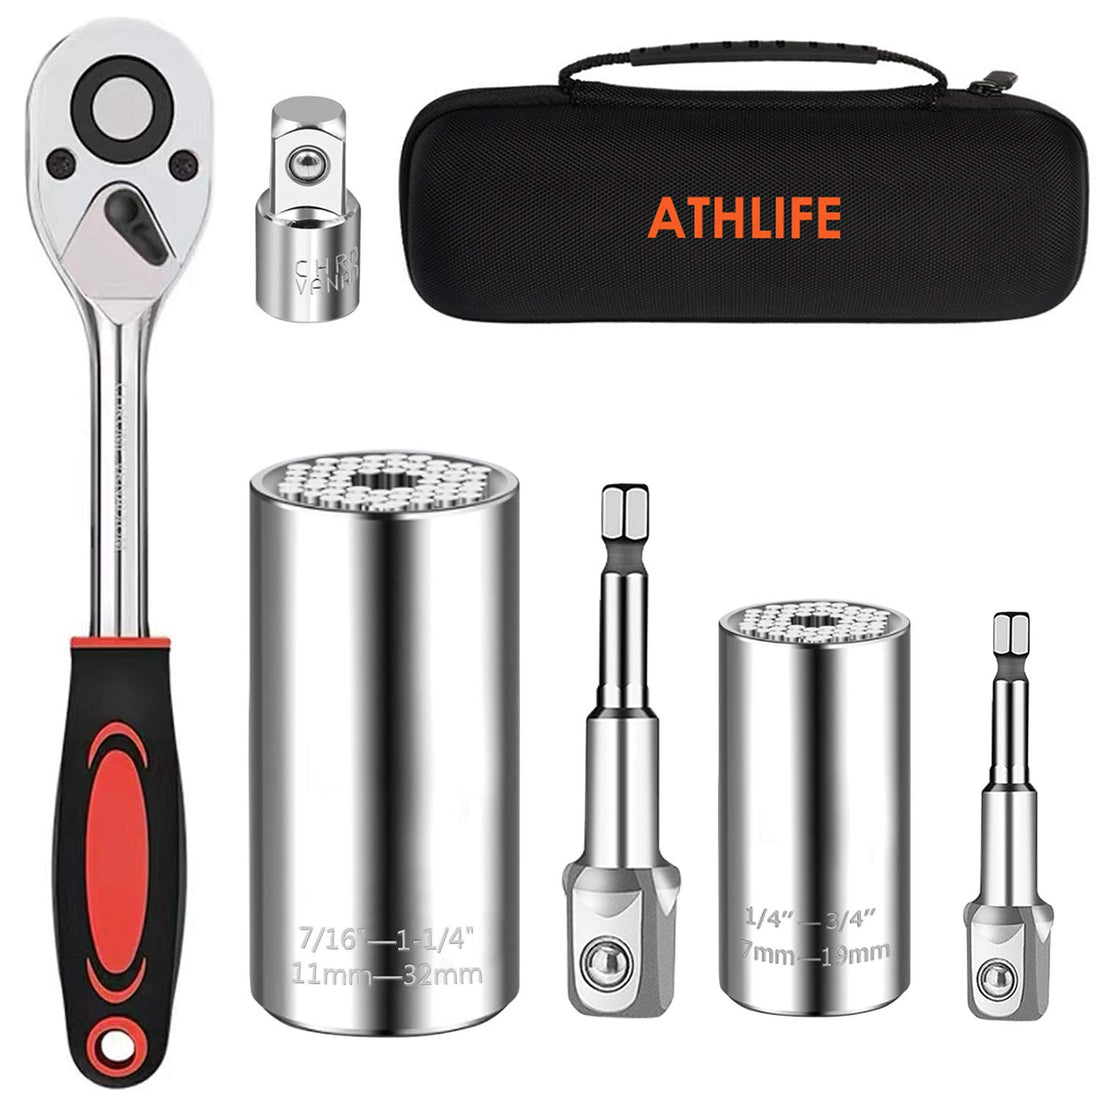 Athlife Universal Socket Wrench Set (11-32mm 7-19mm) Professional Sockets Tools Multi-function Wrench Repair Kit with Power Drill & 3/8 Ratchet Wrench Adapter Chrome Vanadium Steel (6PCS)